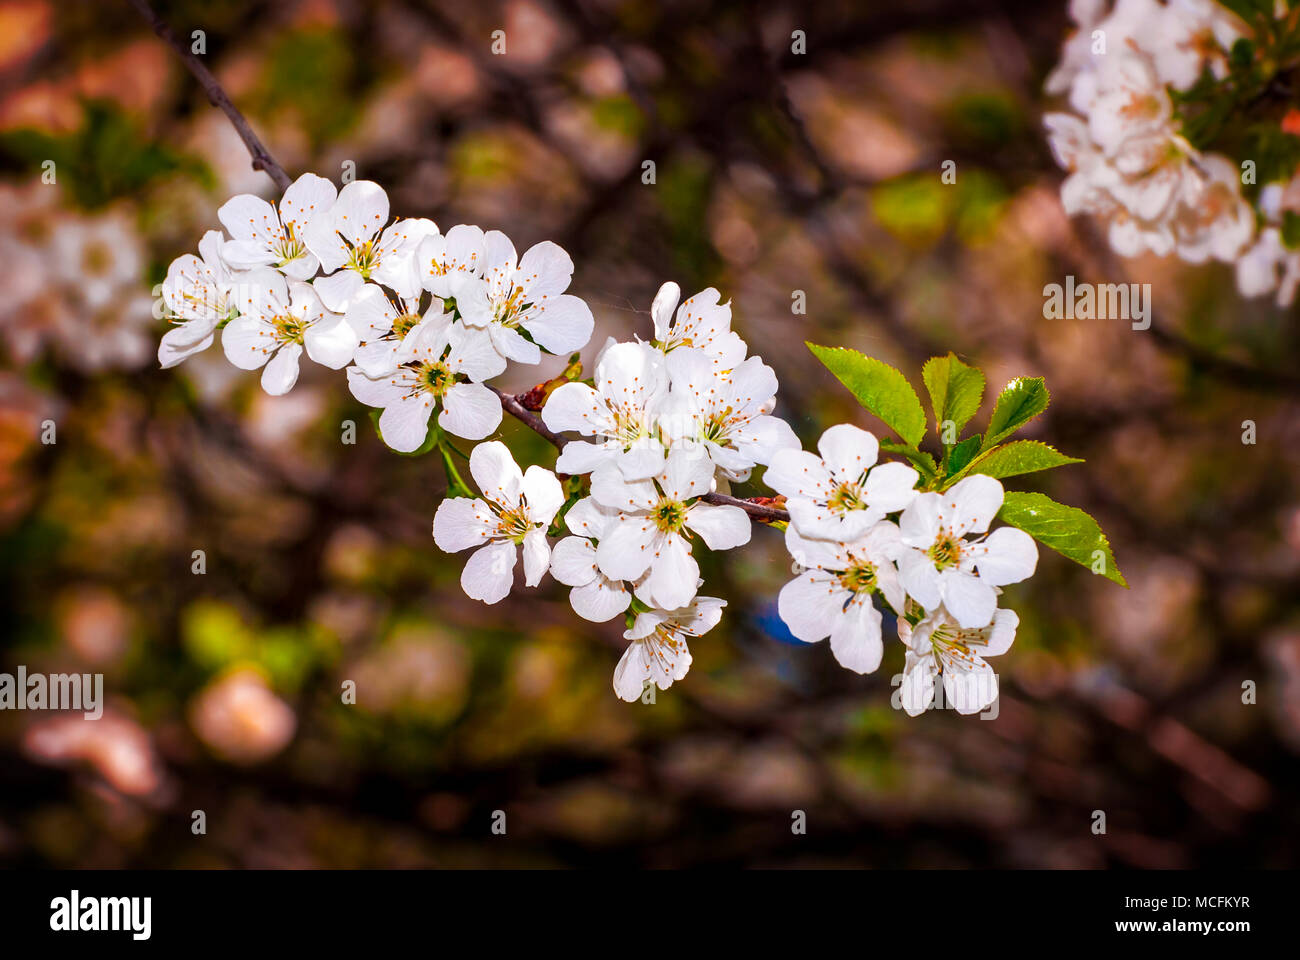 Branch of white spring blossom in soft focus. Stock Photo